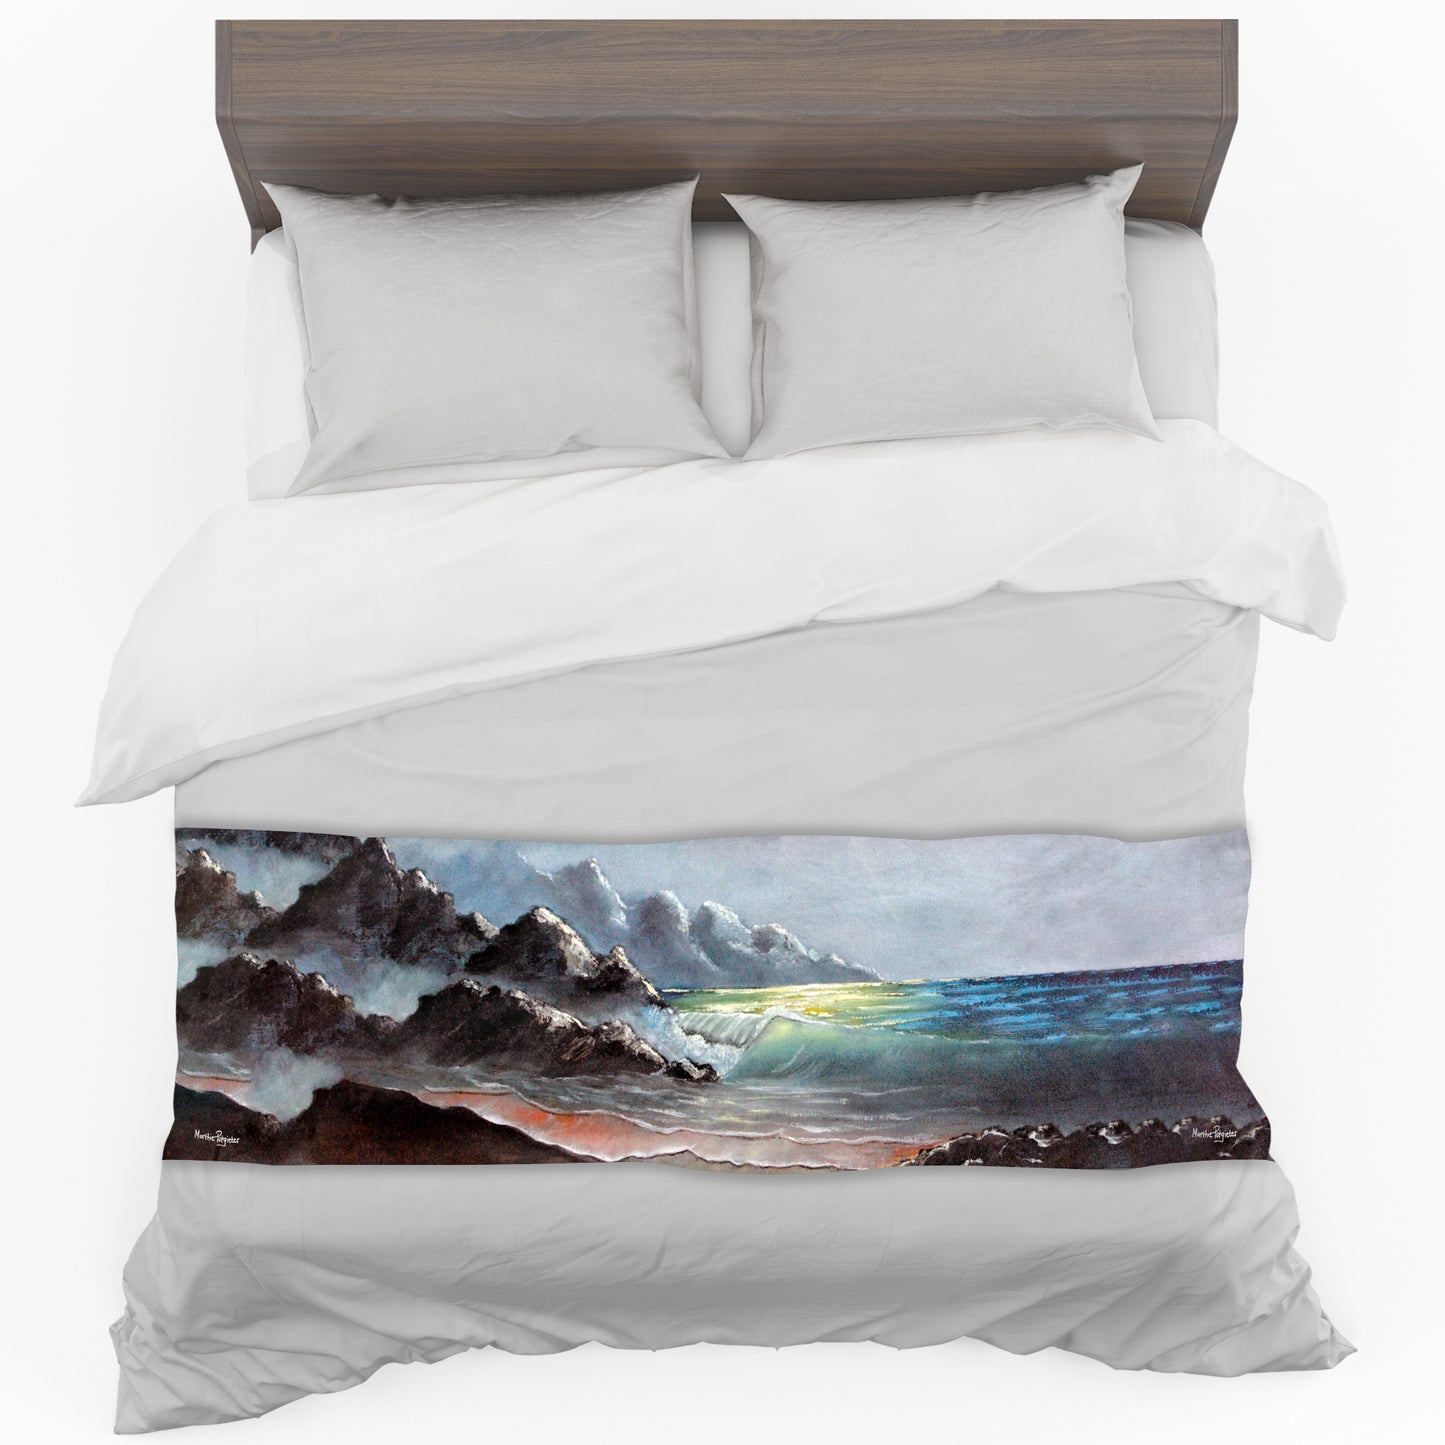 Windy Waves By Marthie Potgieter Bed Runner and Optional Pillowcases